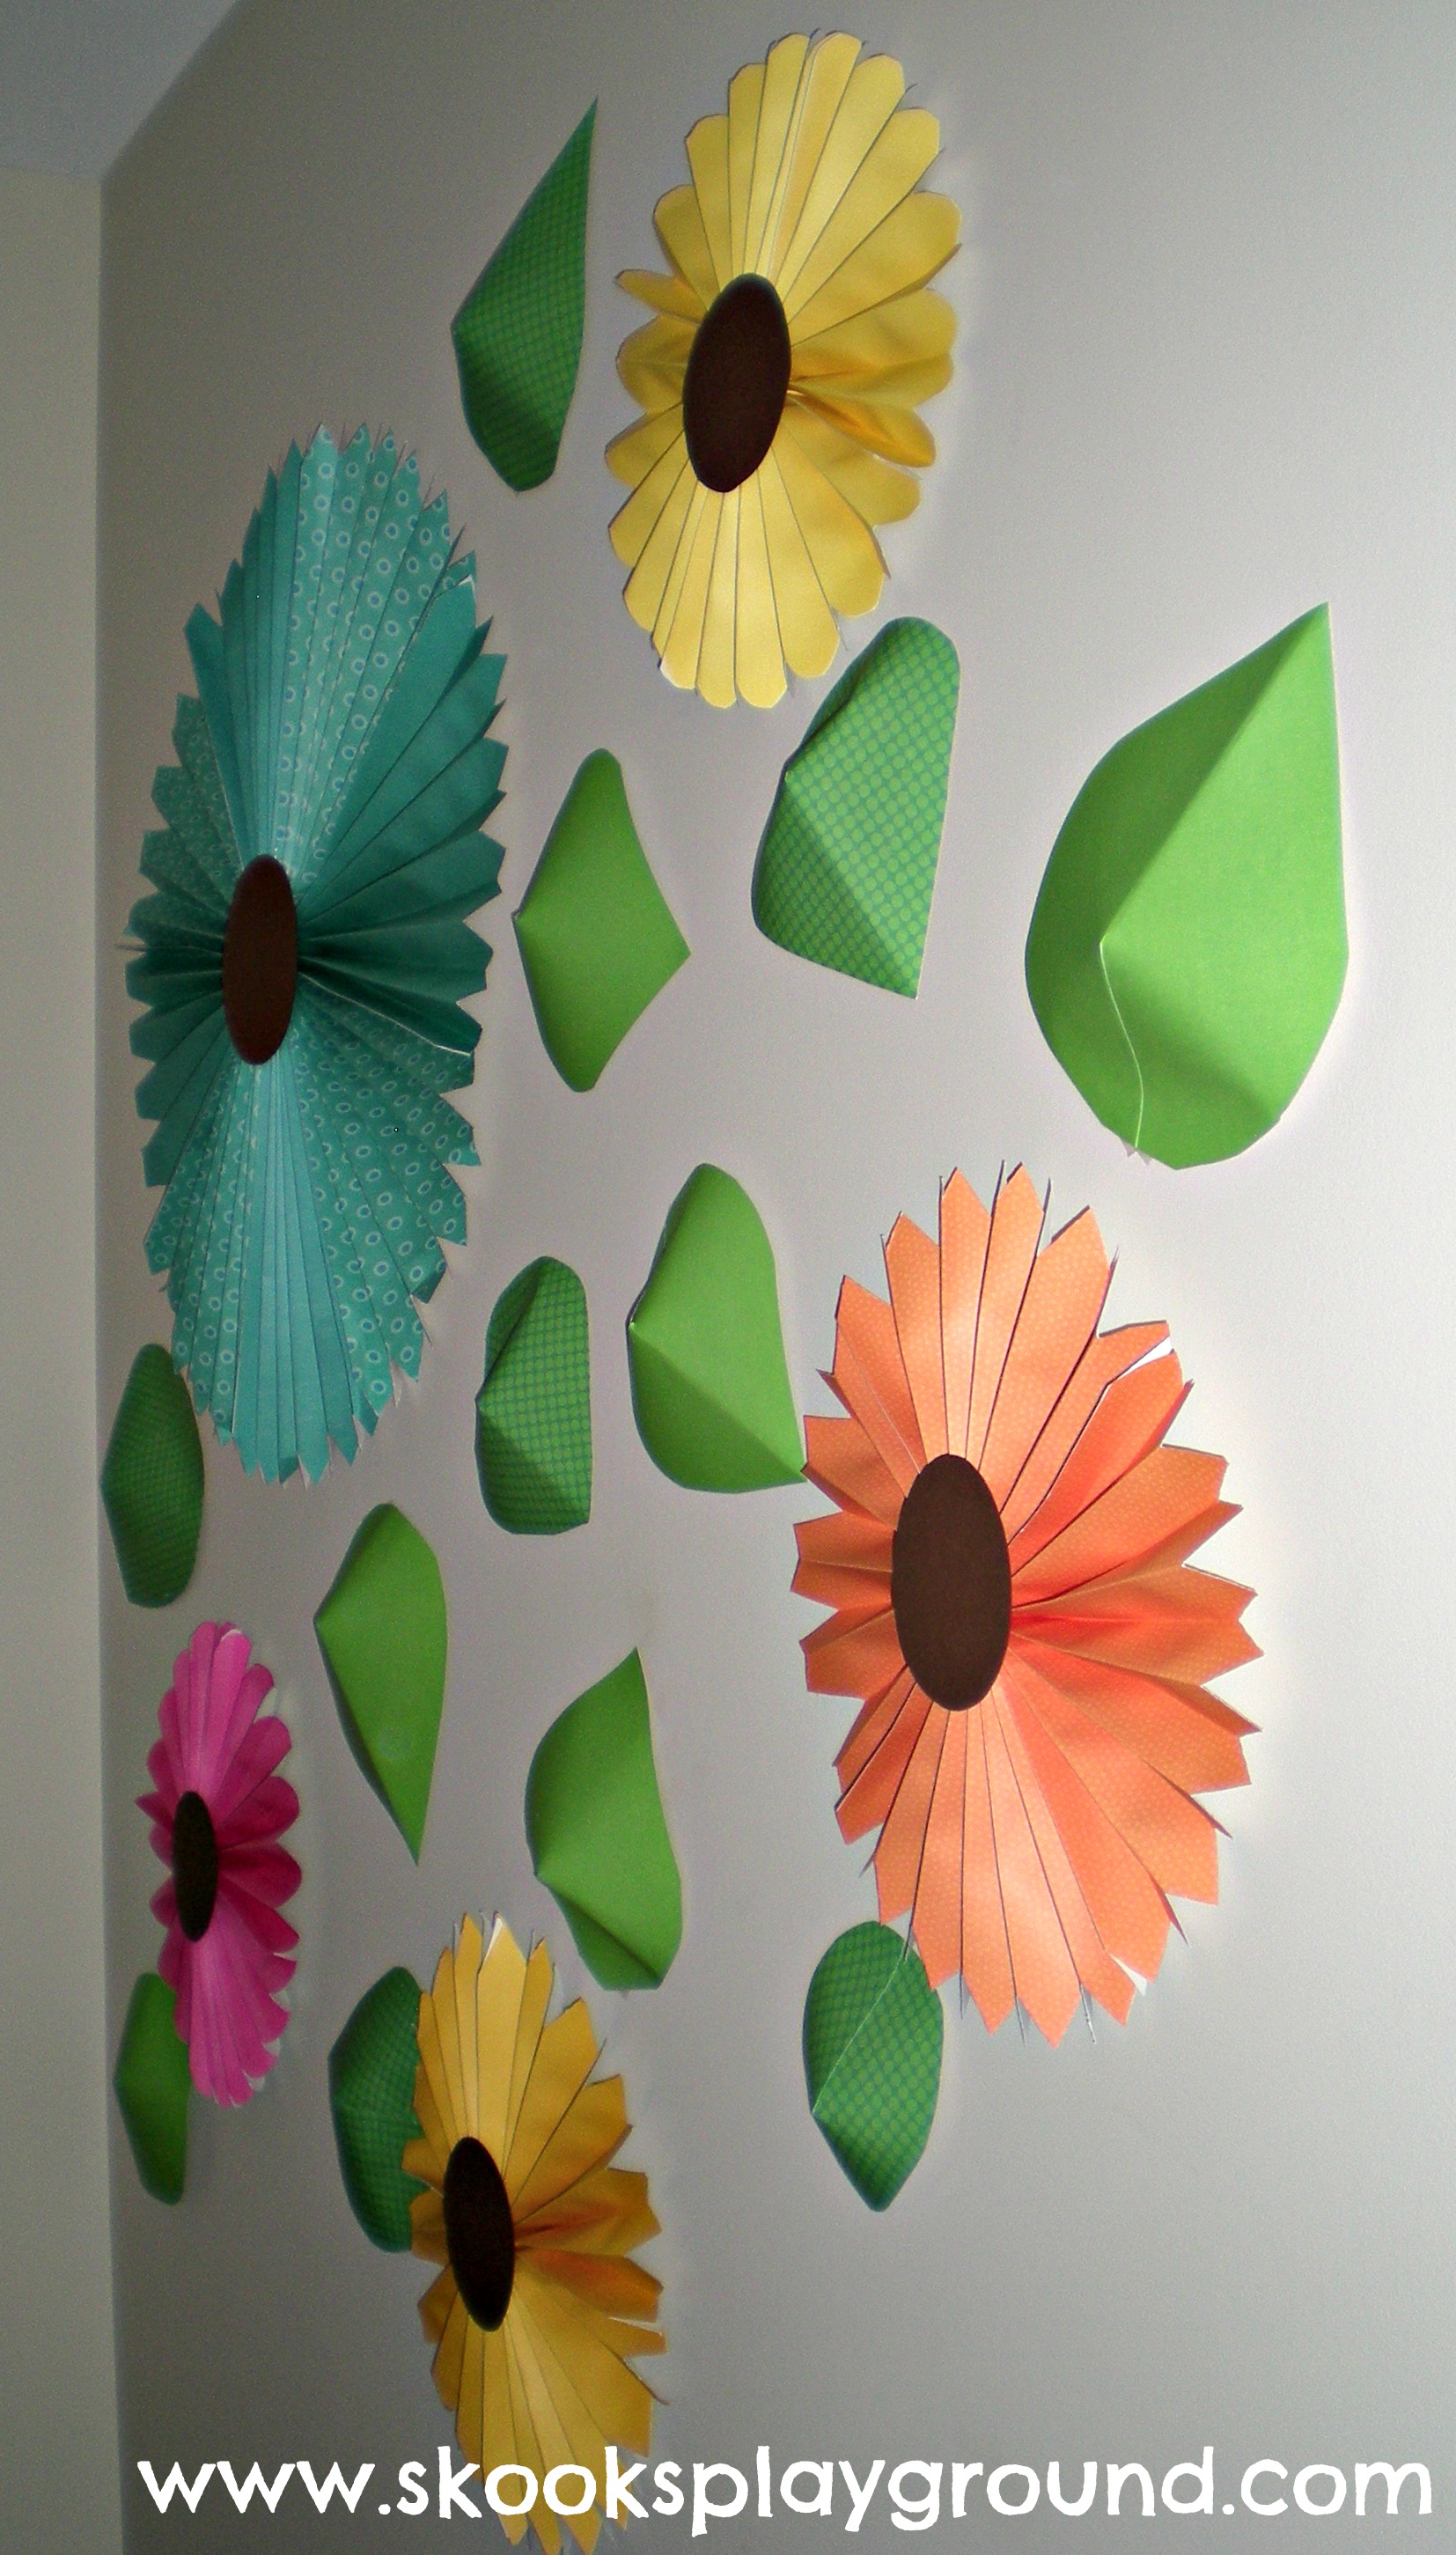 Accordian Wall Flowers - Side View